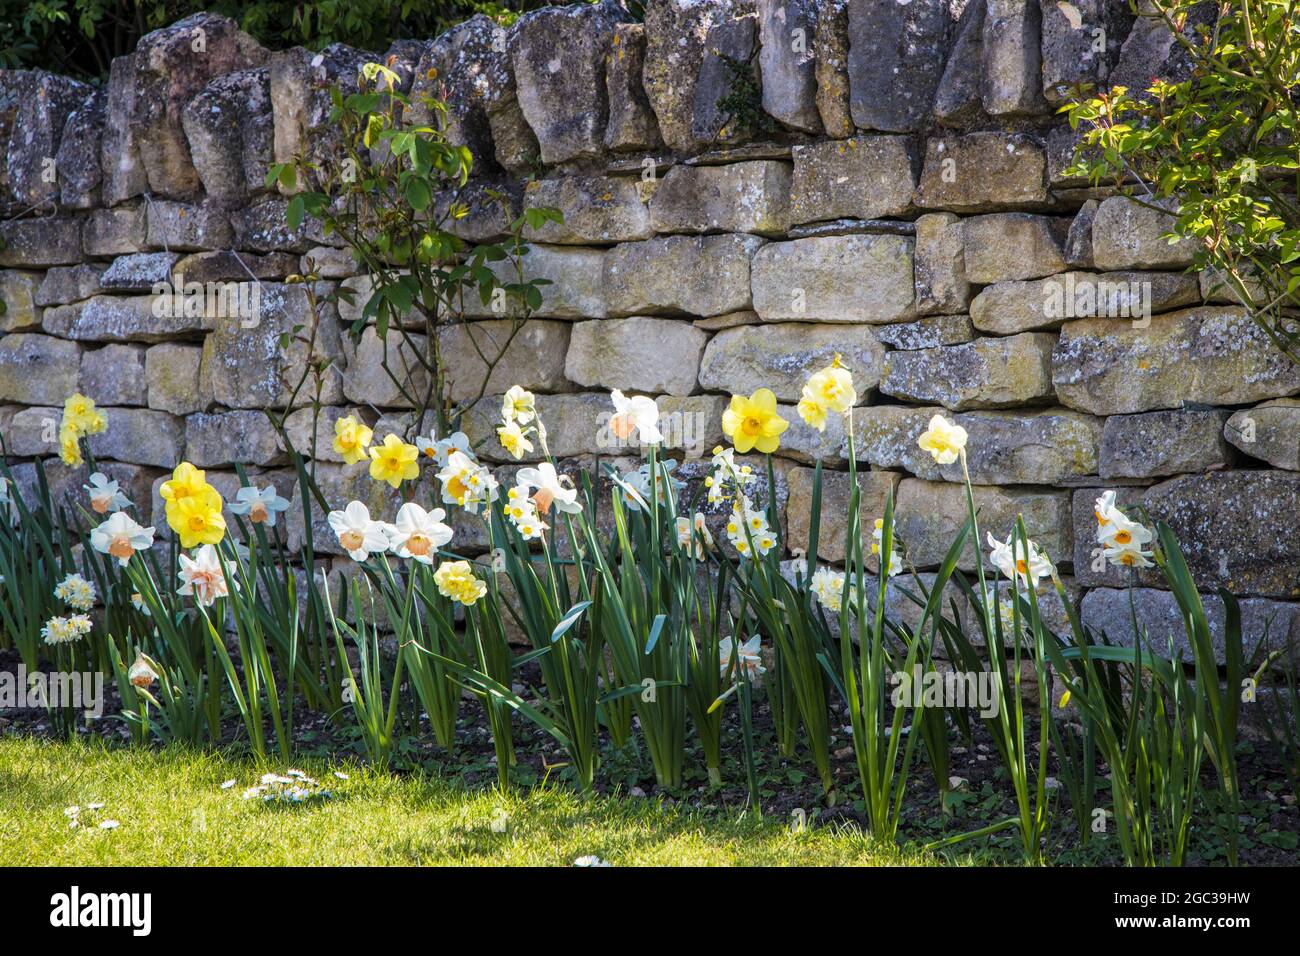 Daffodils growing against a garden wall in spring. Stock Photo